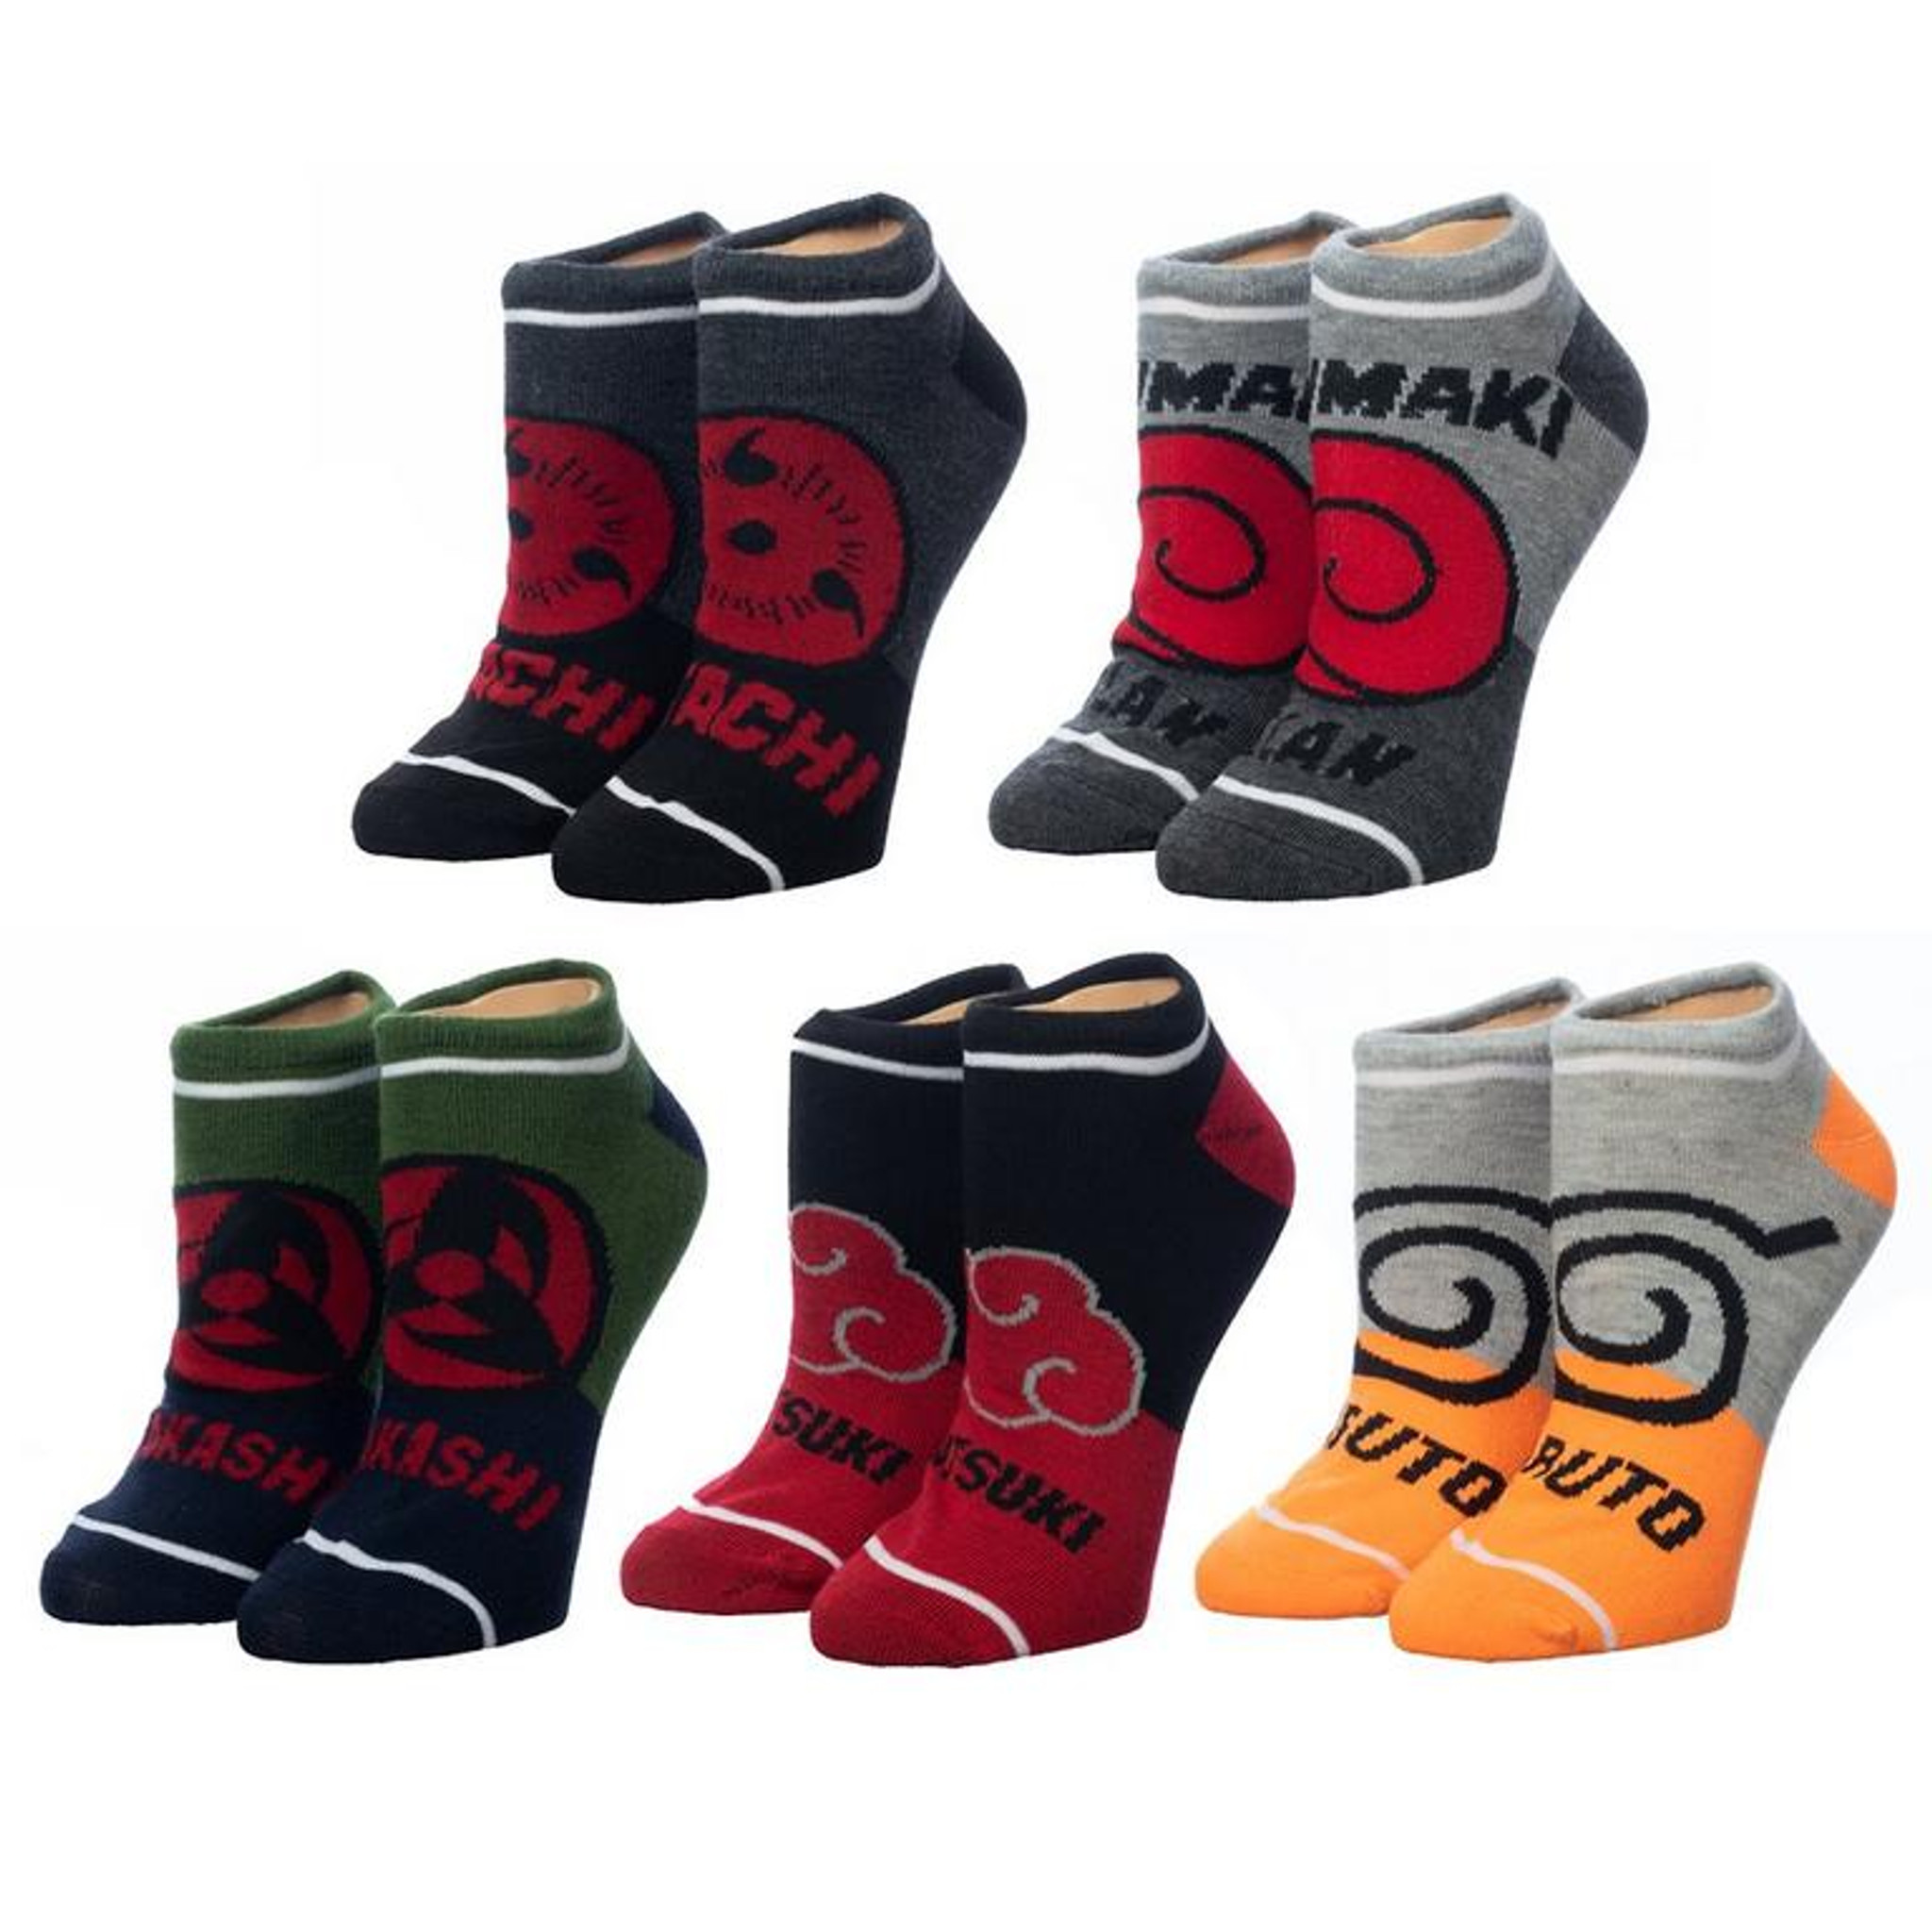 Naruto Shippuden Collection Mix & Match Ankle Socks 5 Pair